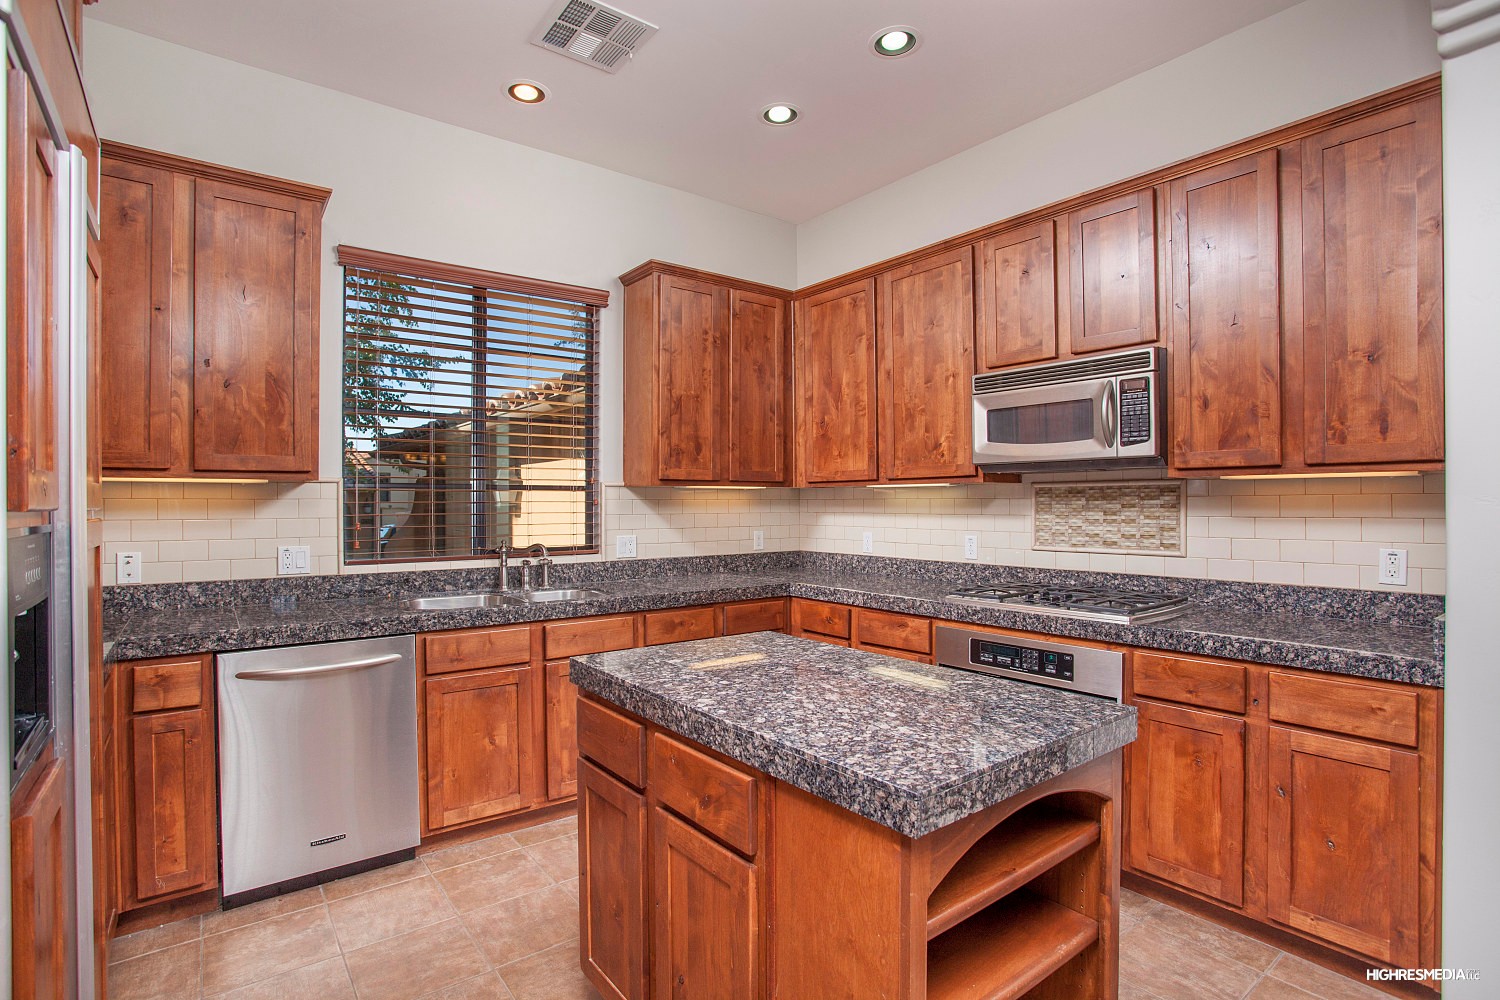 Subway tile backsplash at this Scottsdale townhome for sale in Market Street at DC Ranch located at 20704 N 90th Pl #1005 Scottsdale, AZ 85255 listed by Don Matheson at The Matheson Team